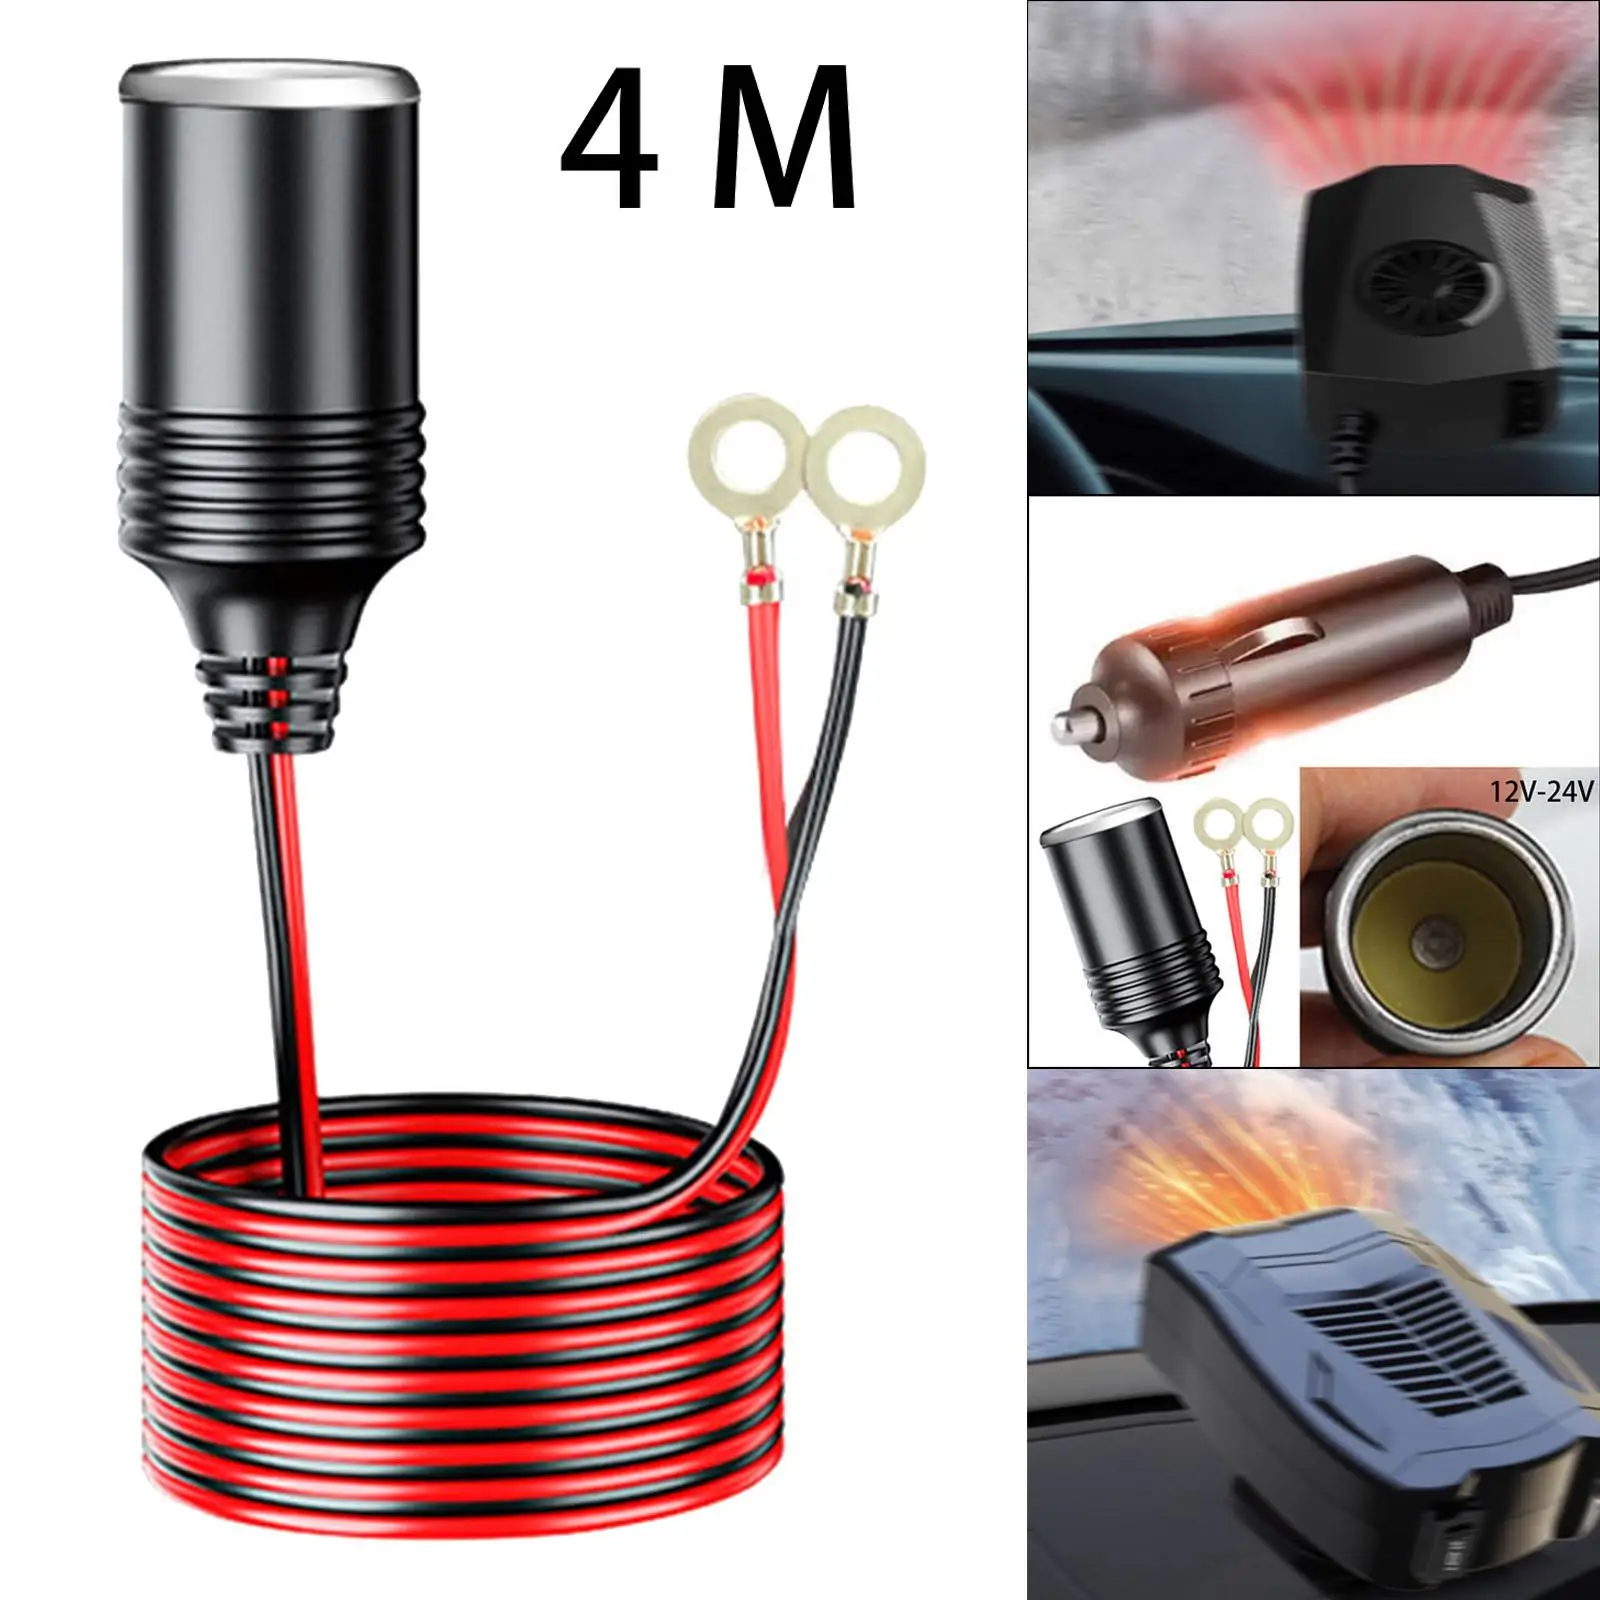 Cigarette Lighter Adapter Power Supply Cord Easy Installation Replaces Accessories Female Plug Outlet to Eyelet Terminals